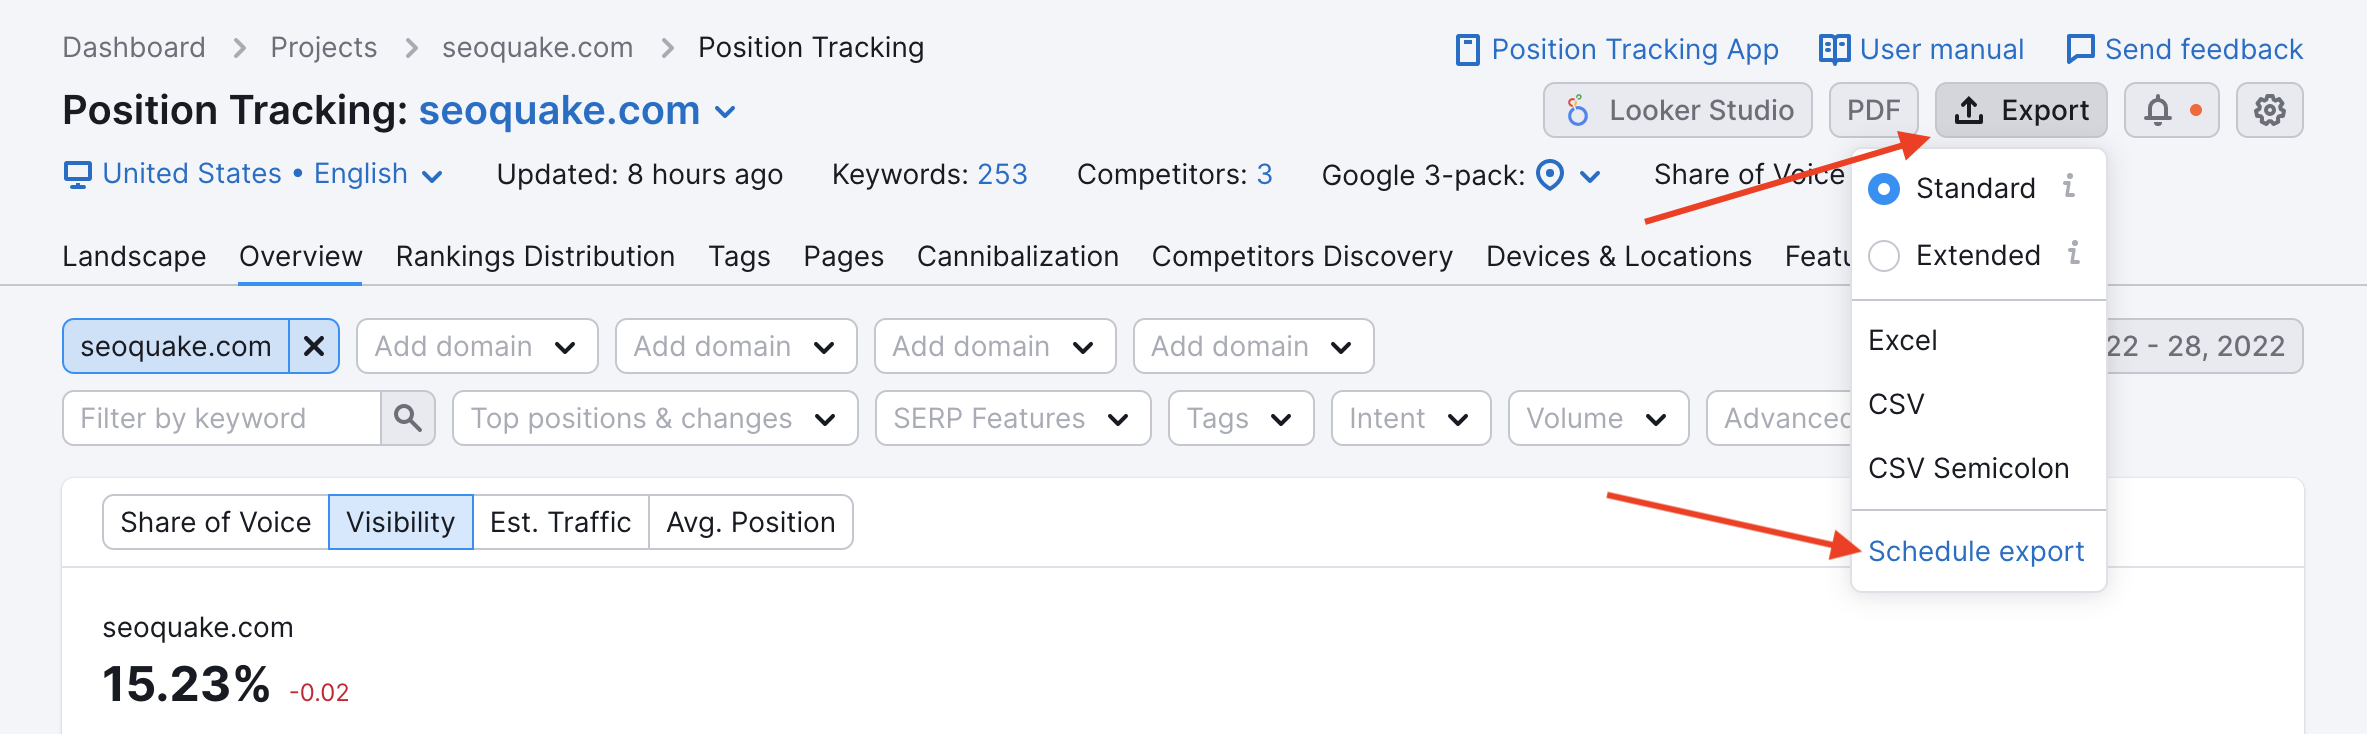 Exporting options in Position Tracking